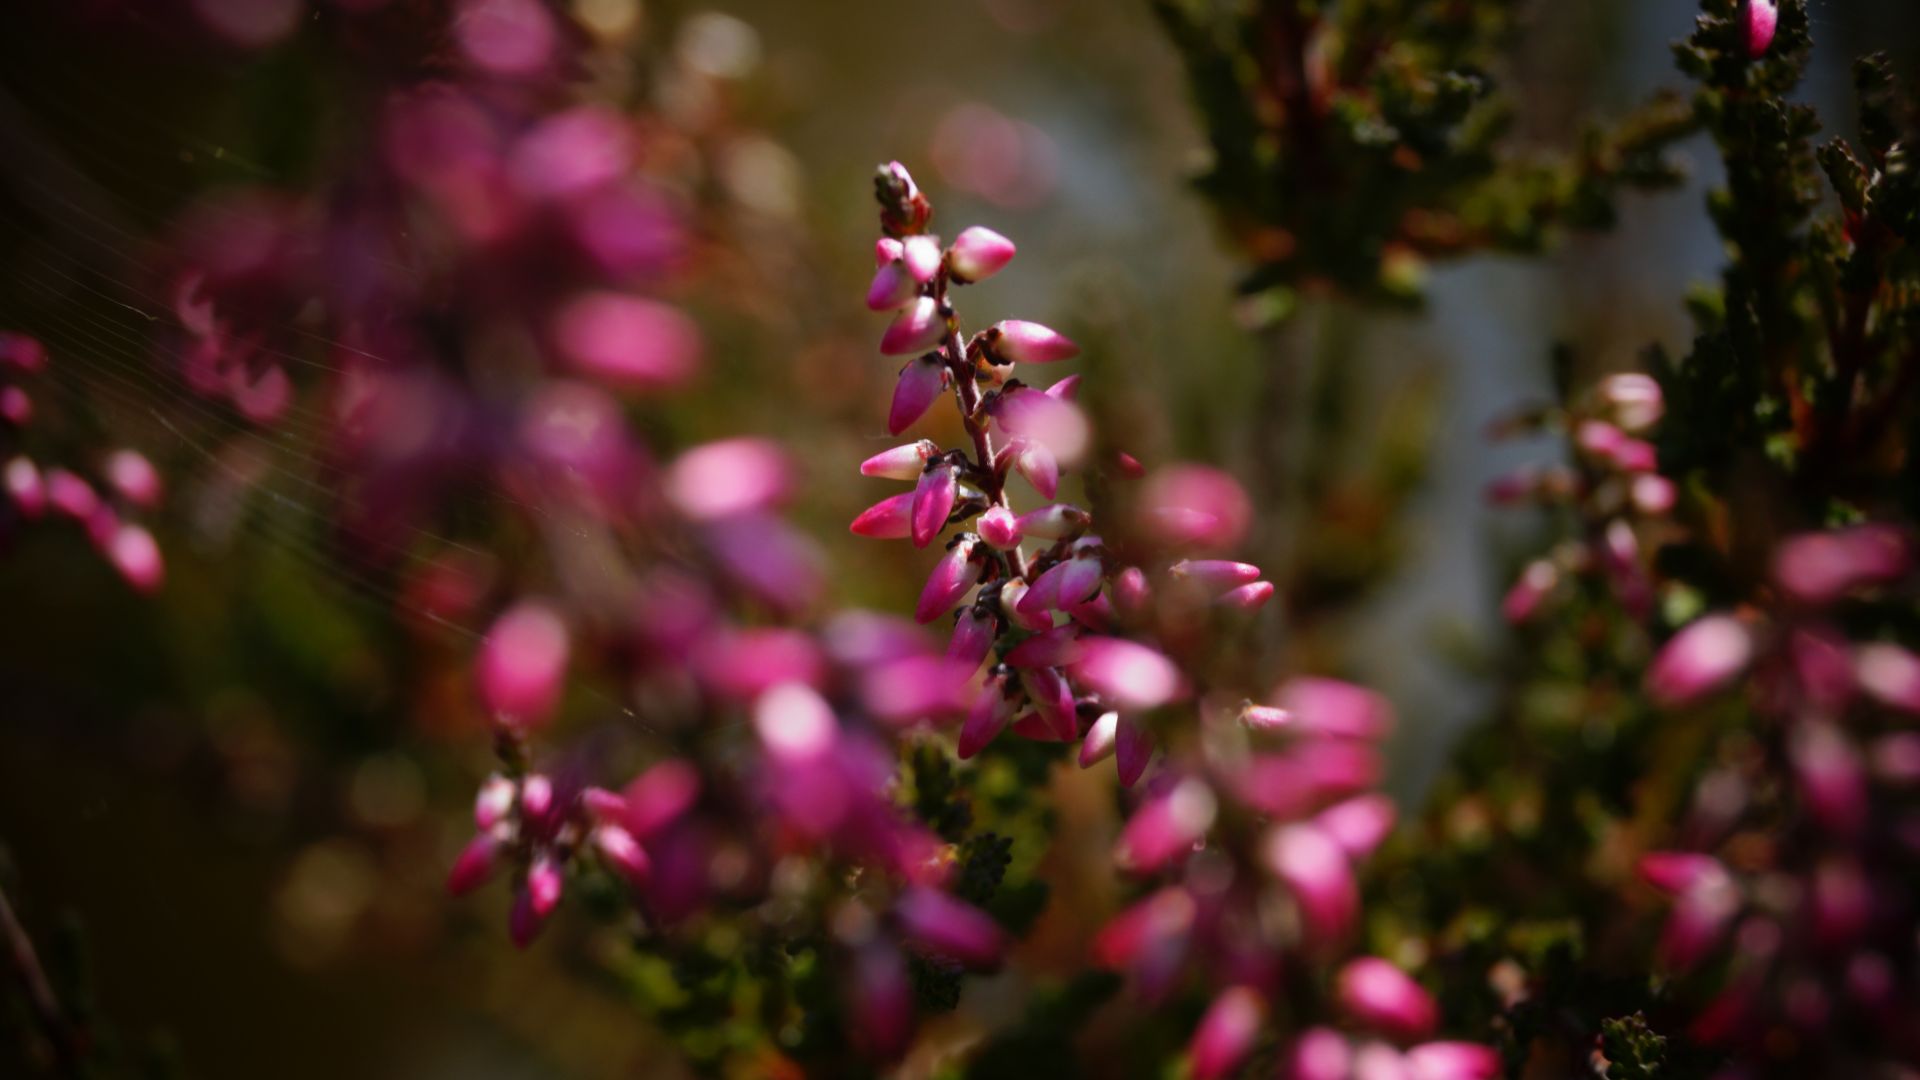 Wallpaper Erica plant, blossom, pink small flowers, blur